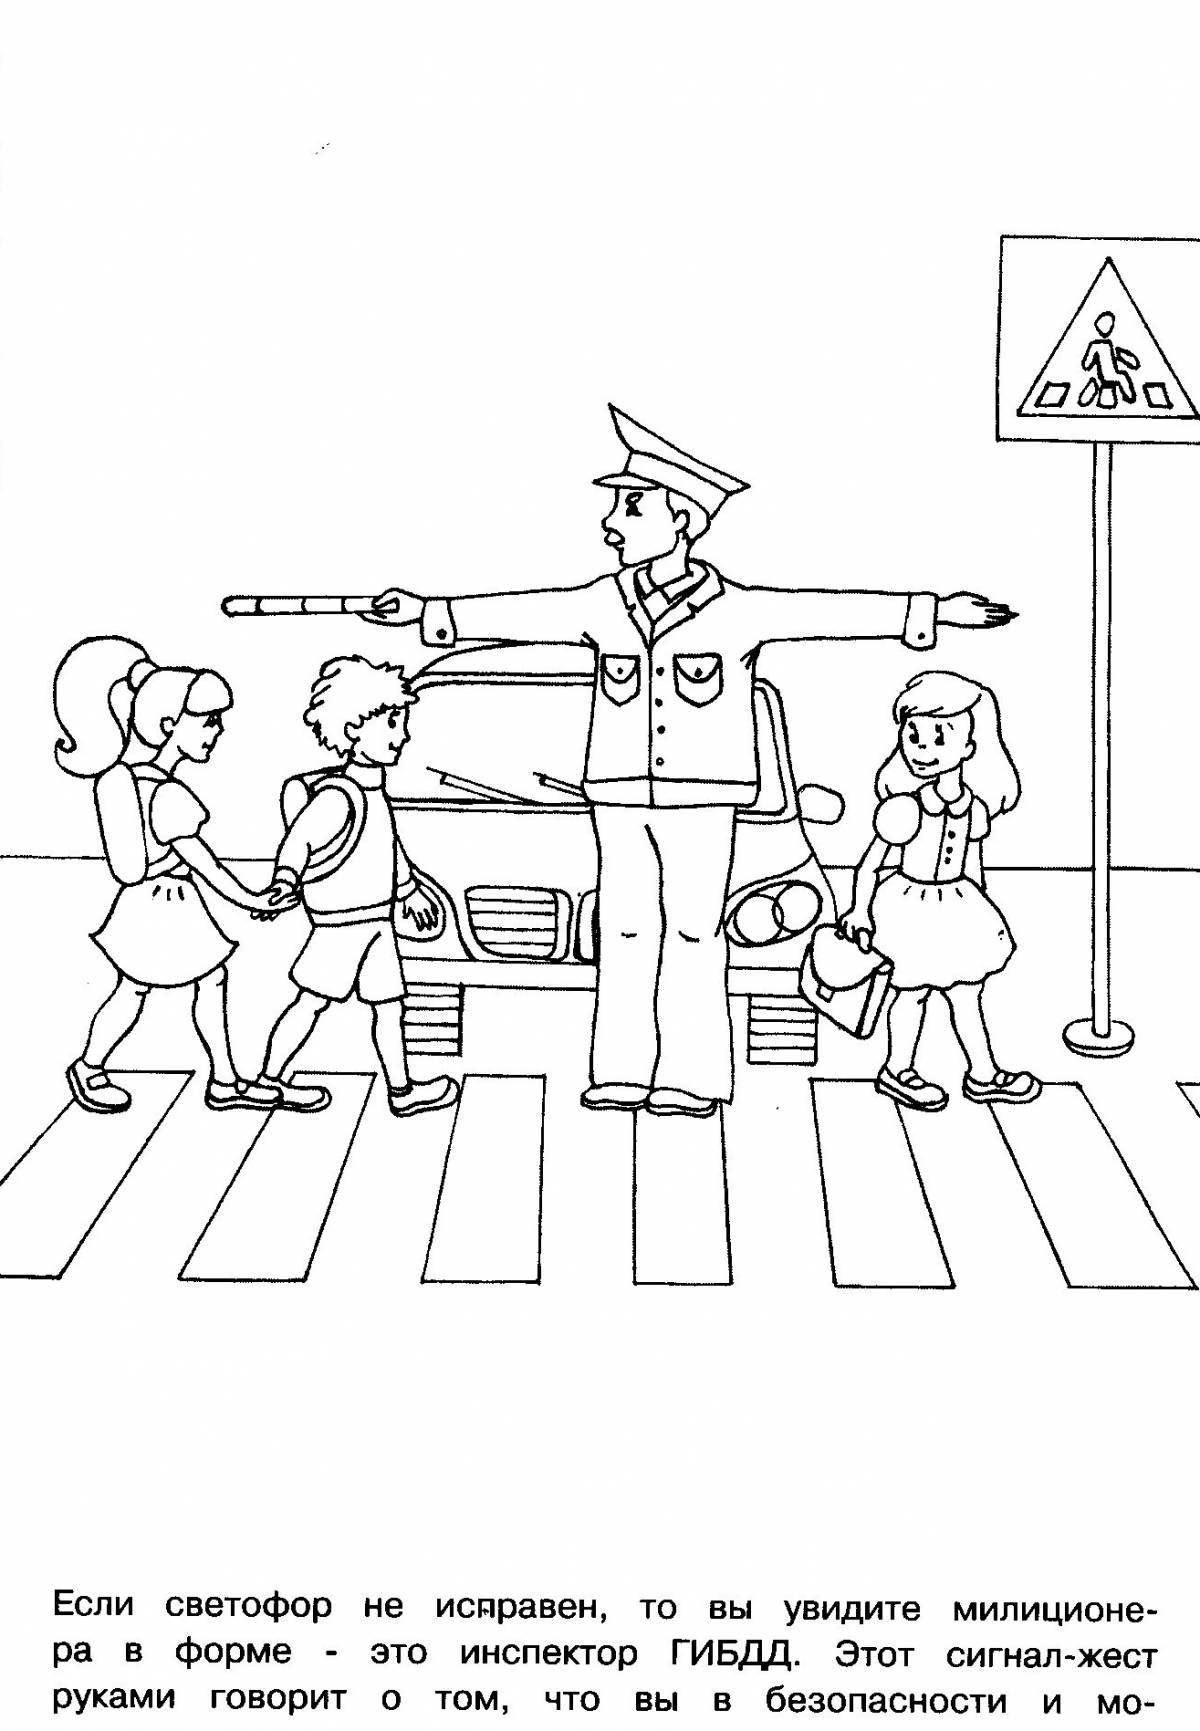 Primary school traffic rules coloring page